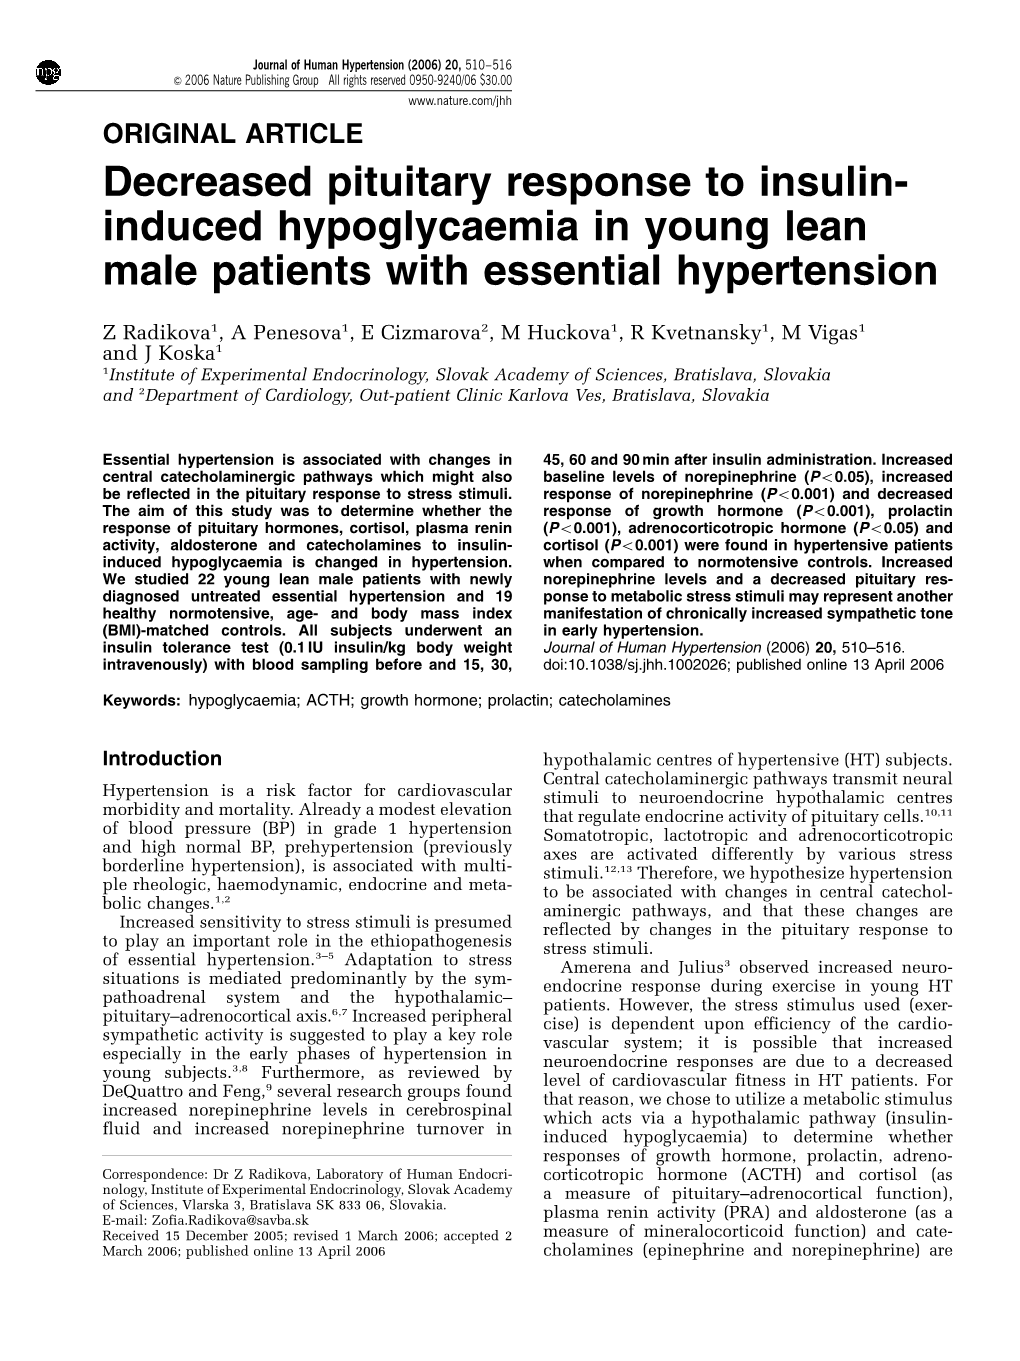 Decreased Pituitary Response to Insulin- Induced Hypoglycaemia in Young Lean Male Patients with Essential Hypertension